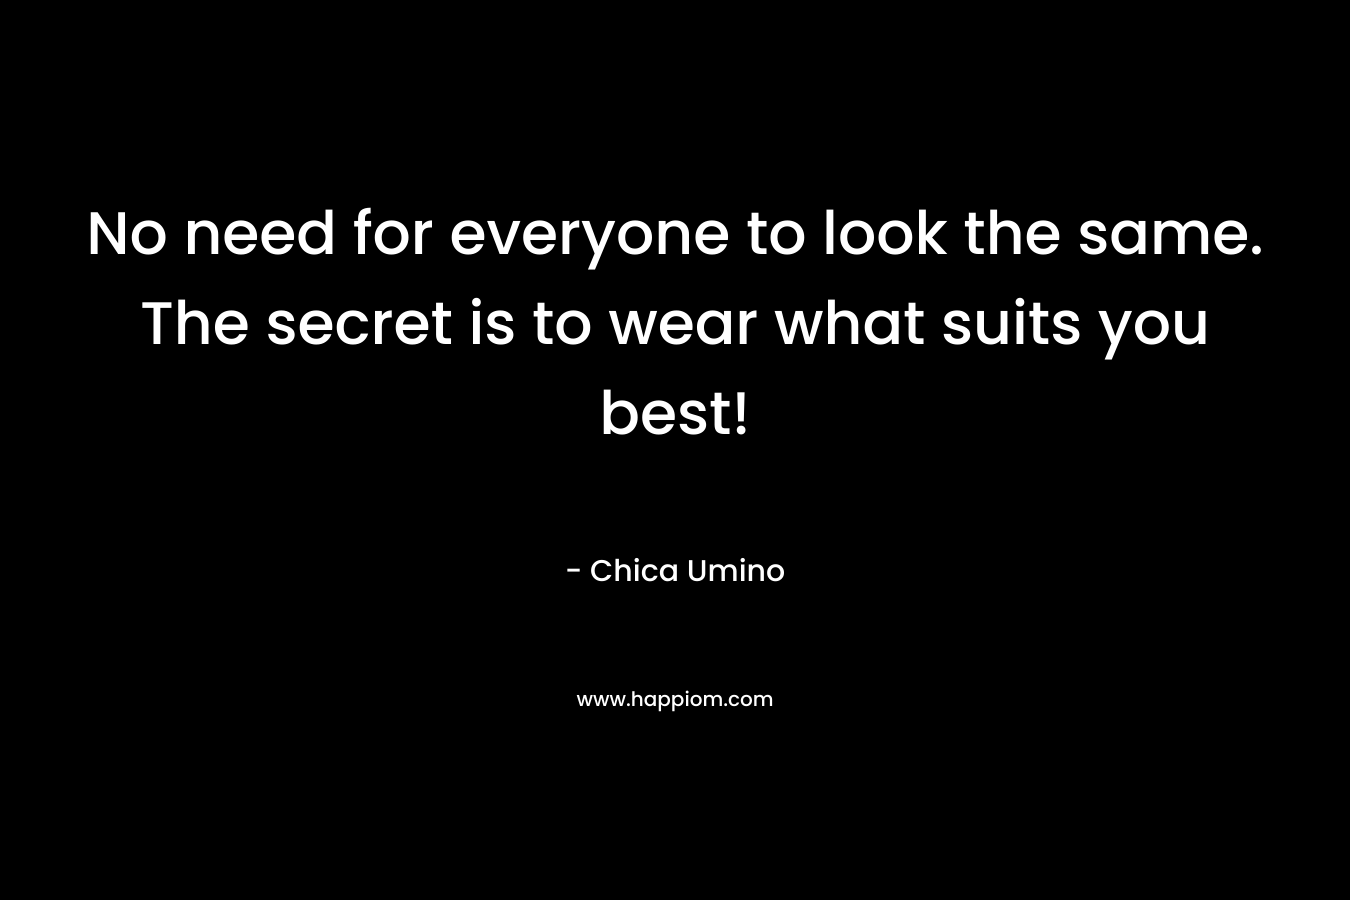 No need for everyone to look the same. The secret is to wear what suits you best! – Chica Umino